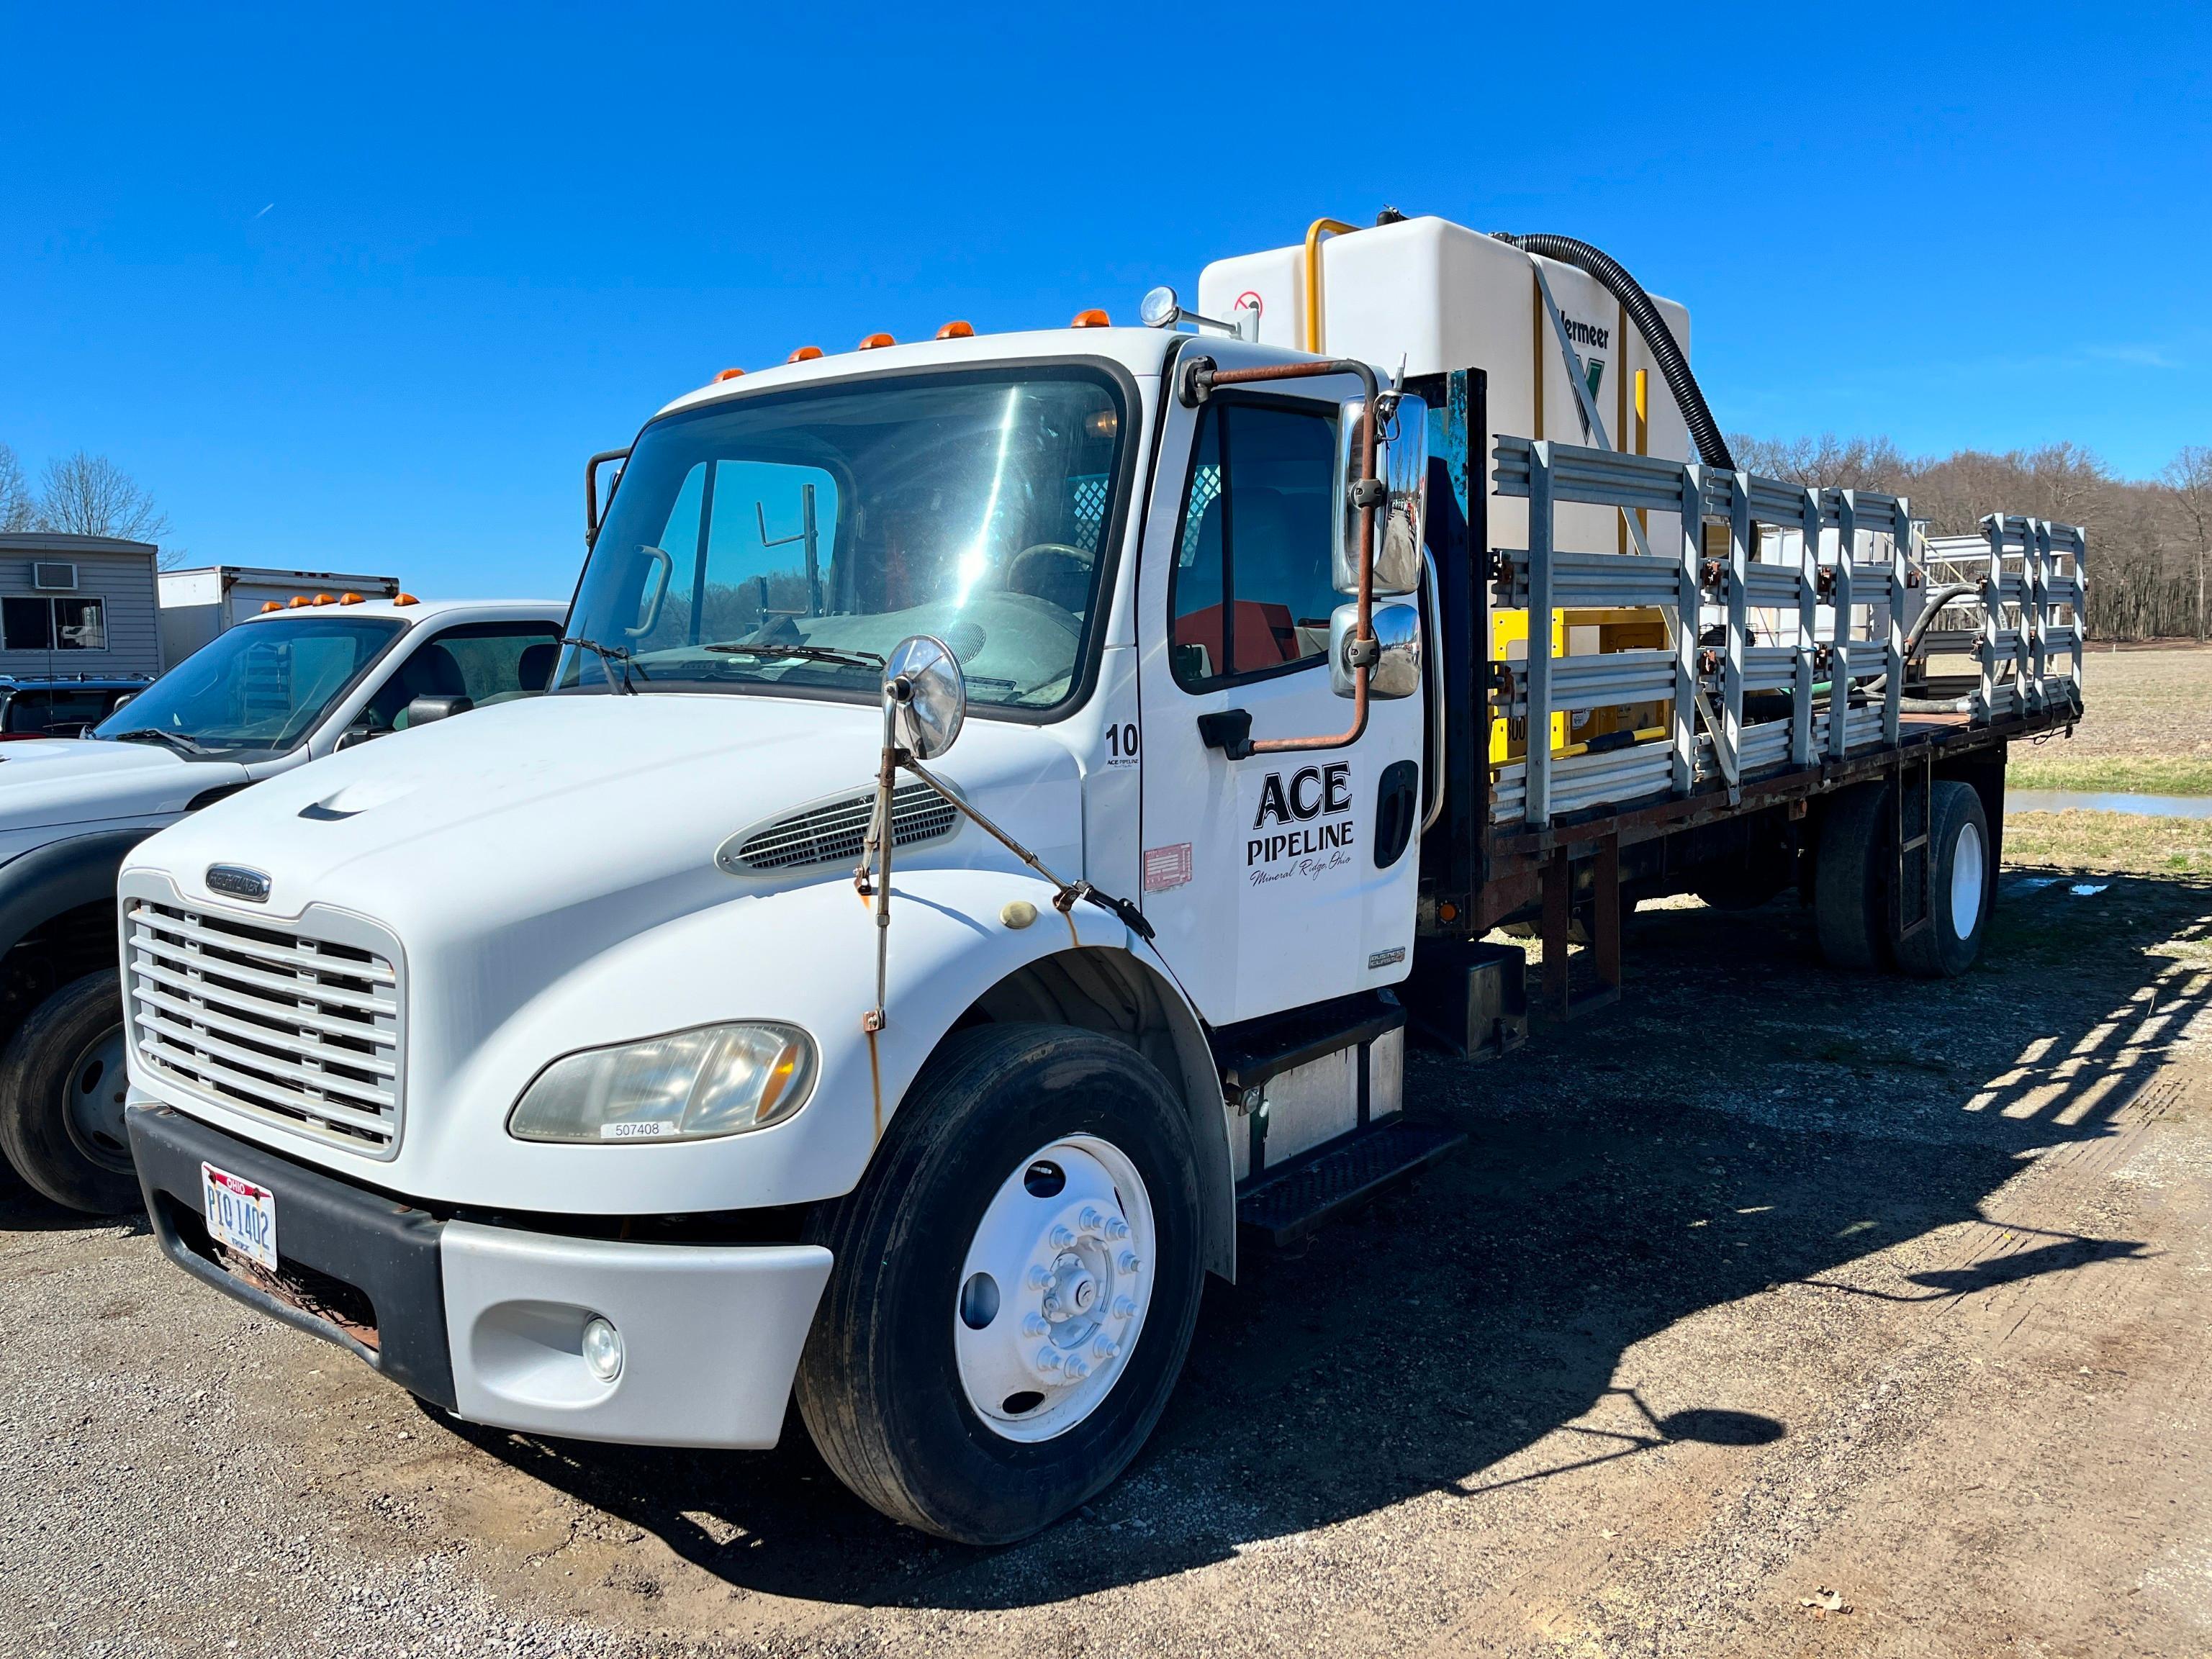 2007 FREIGHTLINER BUSINESS CLASS M2 106 STAKE TRUCK VN:7HY10631 powered by Cat C7 diesel engine,